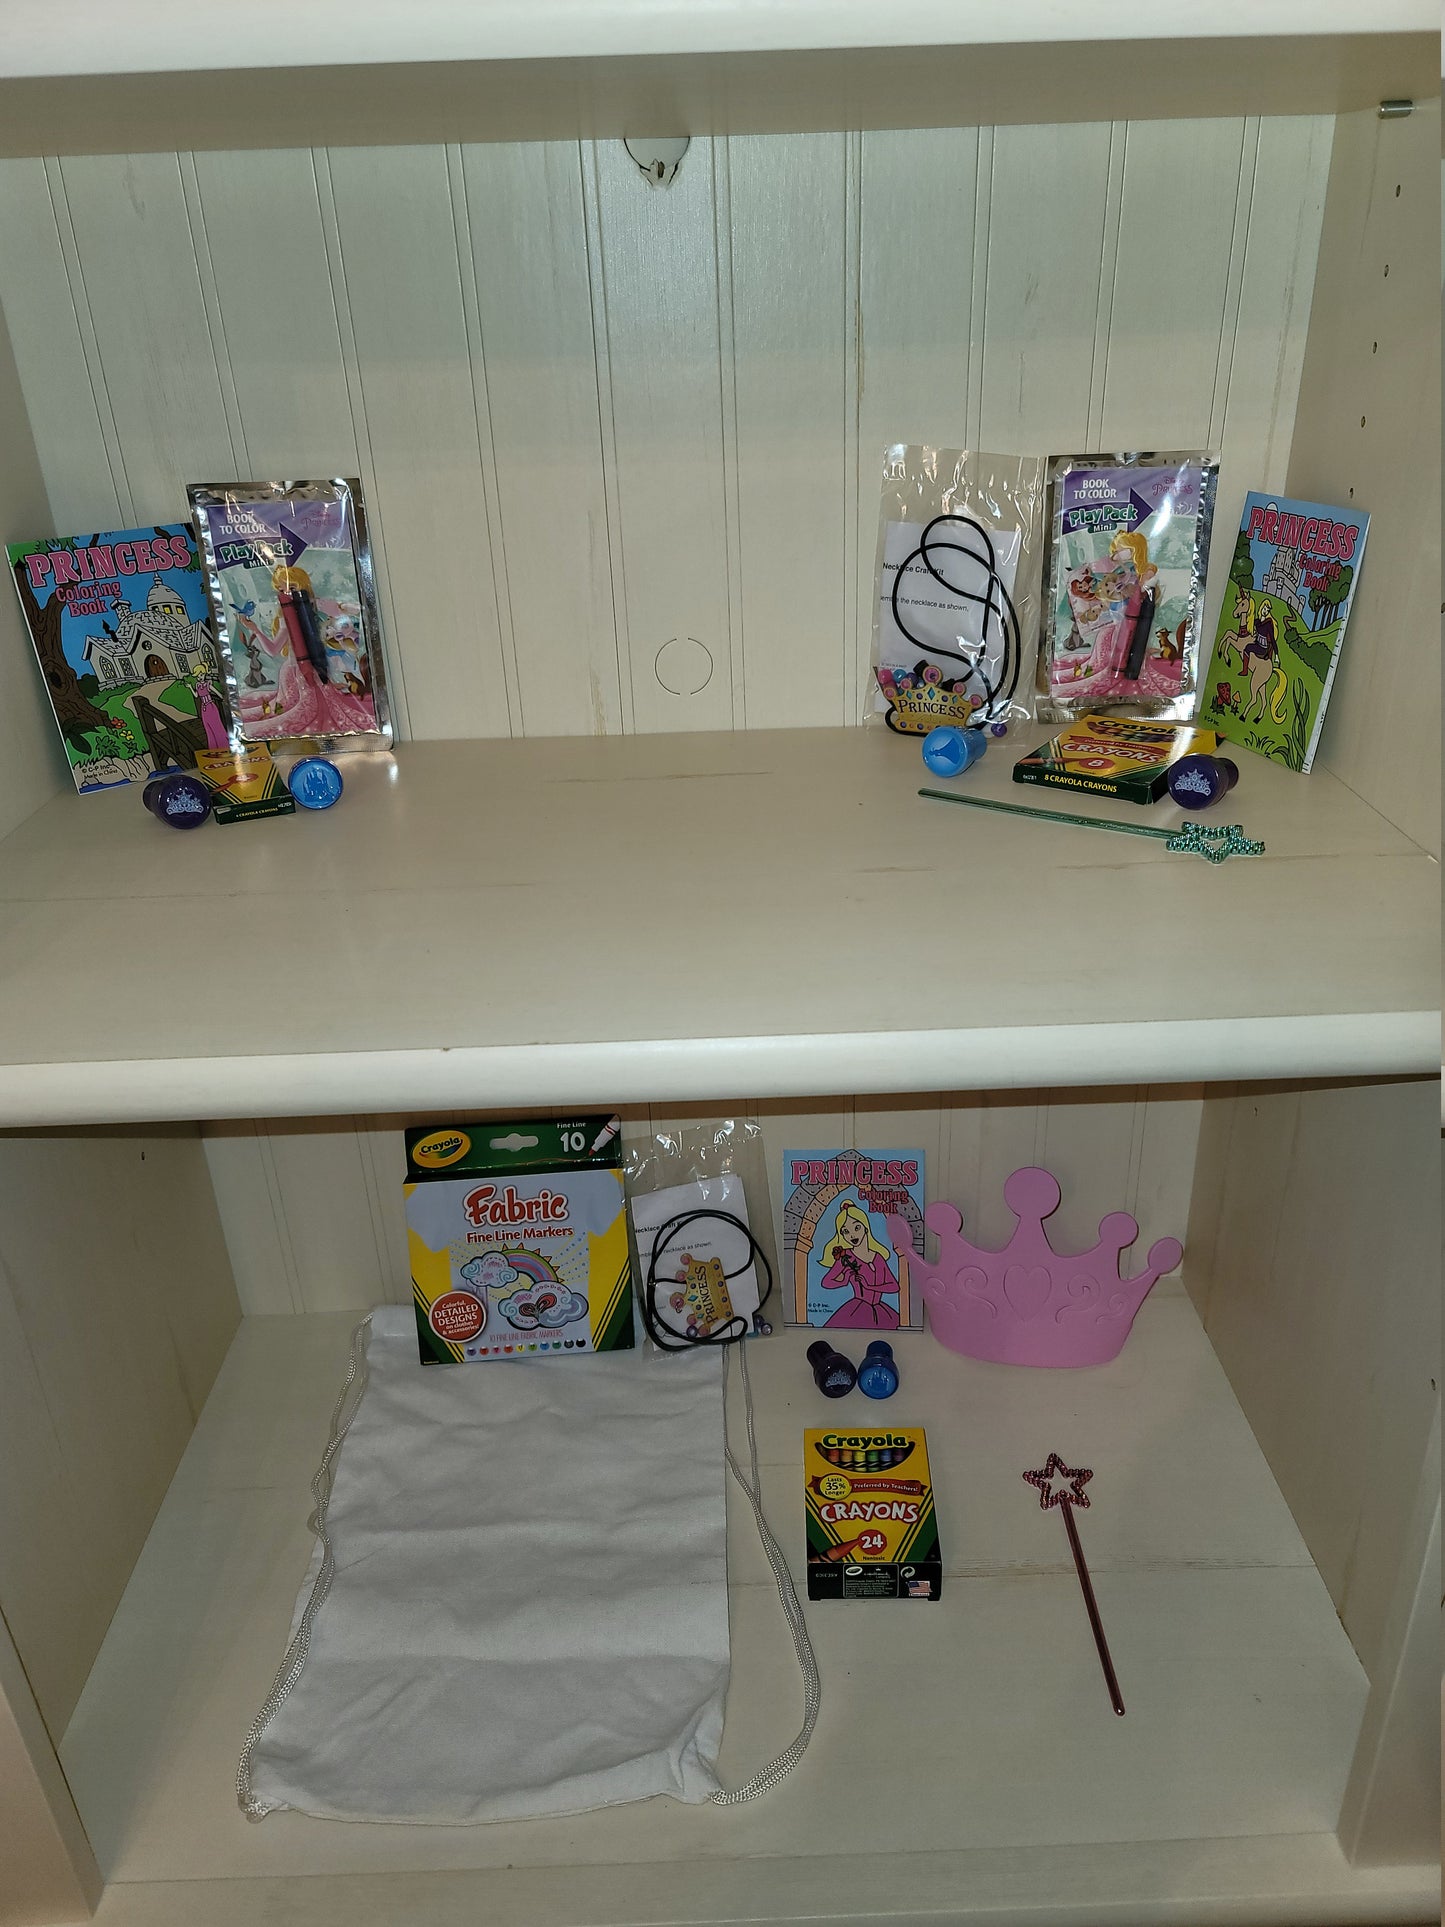 PRINCESS Themed Kid Activity Set - Arts & Crafts, Games, and Activities for recommended ages 3 - 10 in reusable gift box